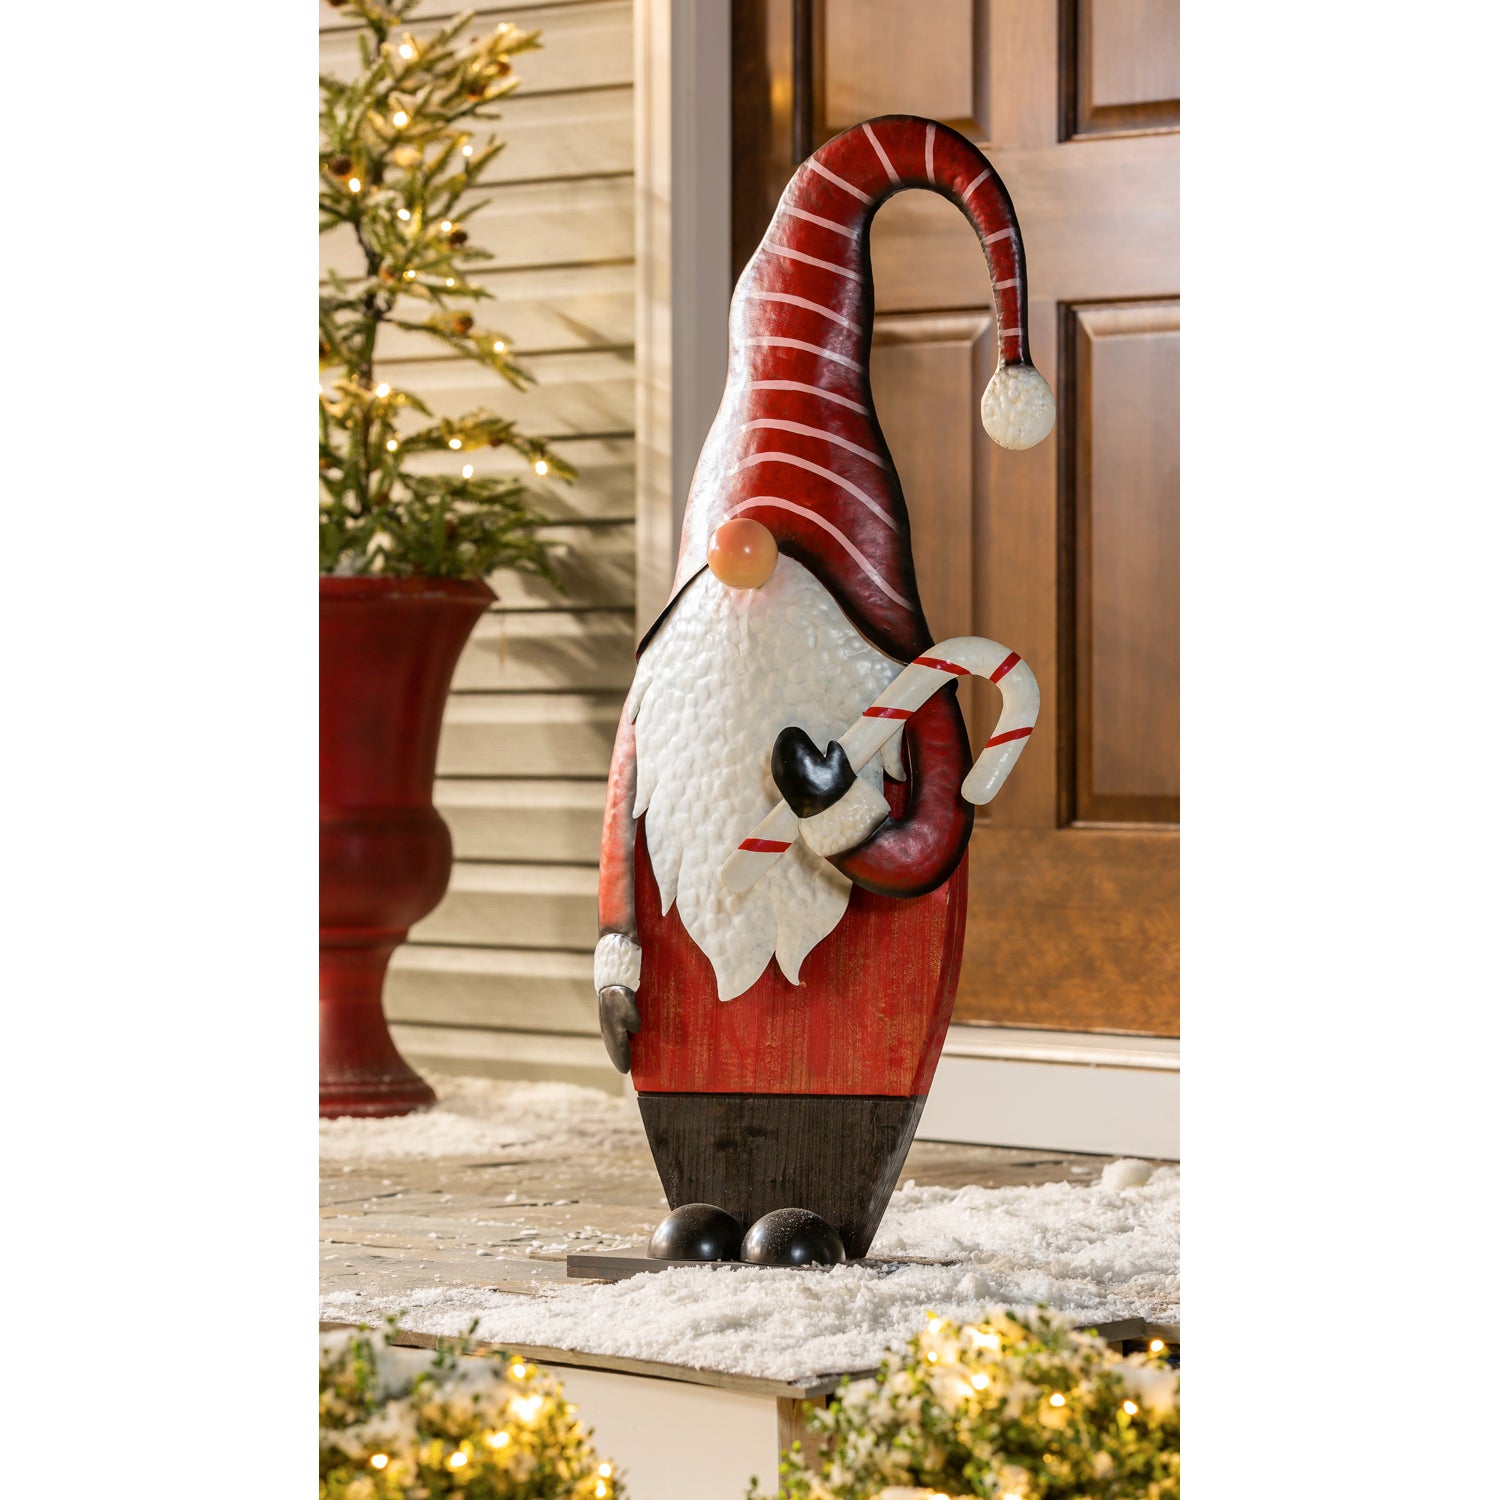 40" Metal and Wood Holiday Gnome Garden Statuary